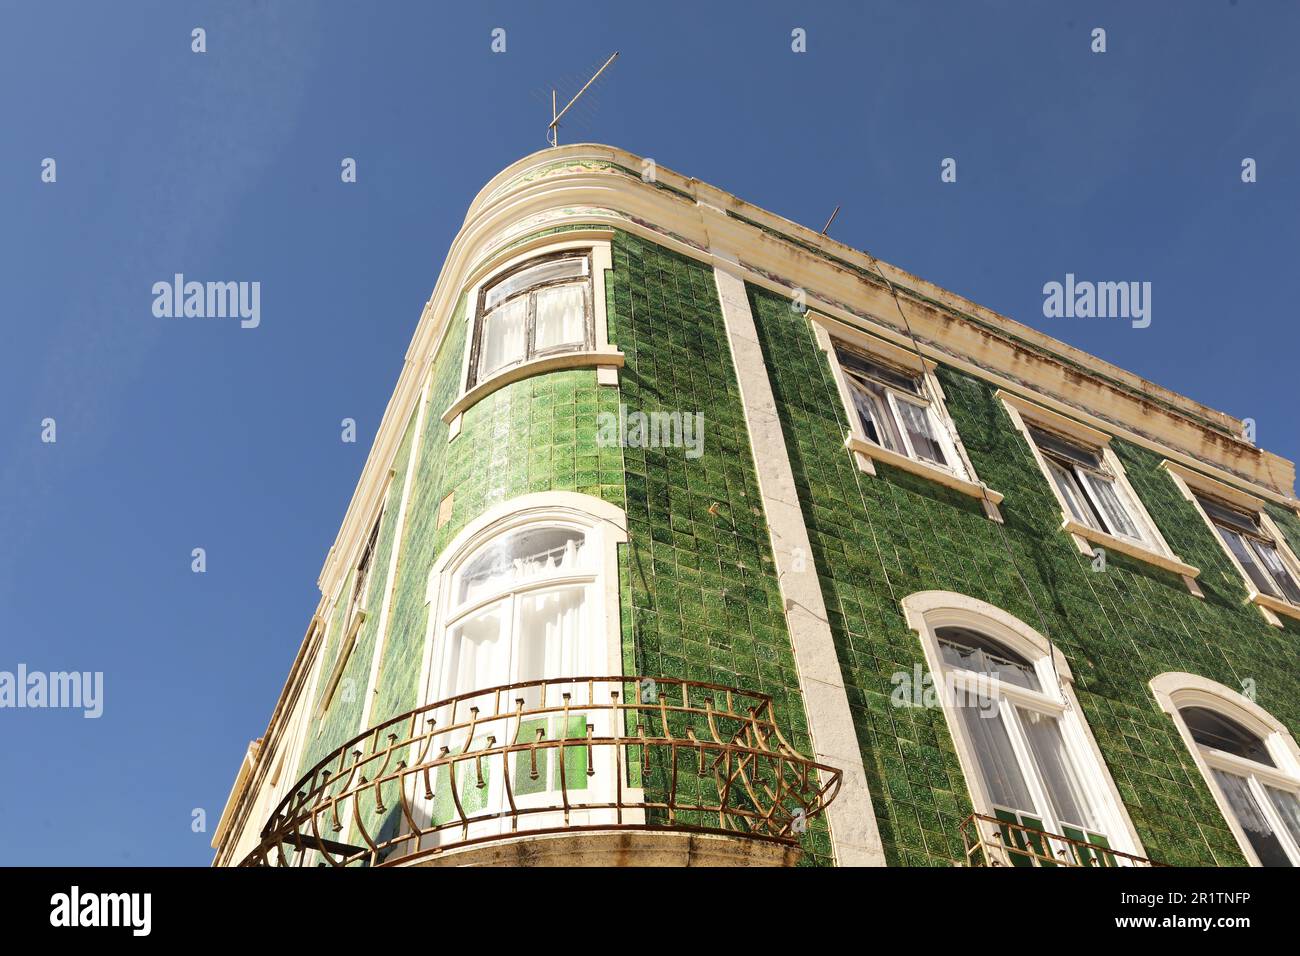 Traditional green tiled building, Old Town, Lagos, Algarve, Portugal Stock Photo